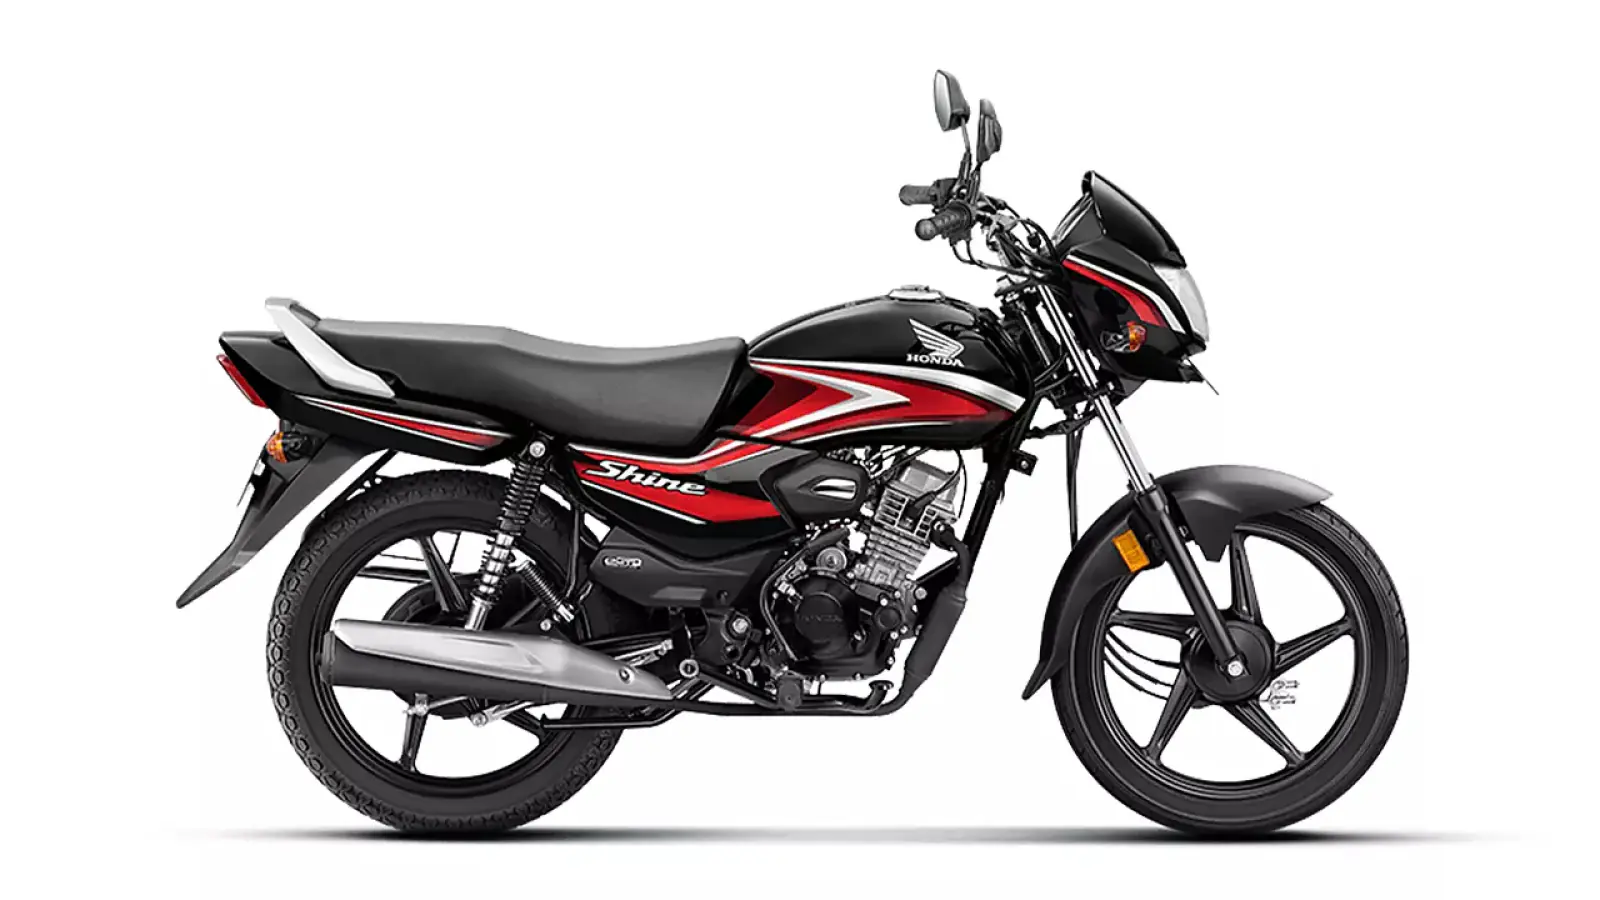 More than three lakh Indians expressed confidence in Honda Shine 100 in one year, know the features and price